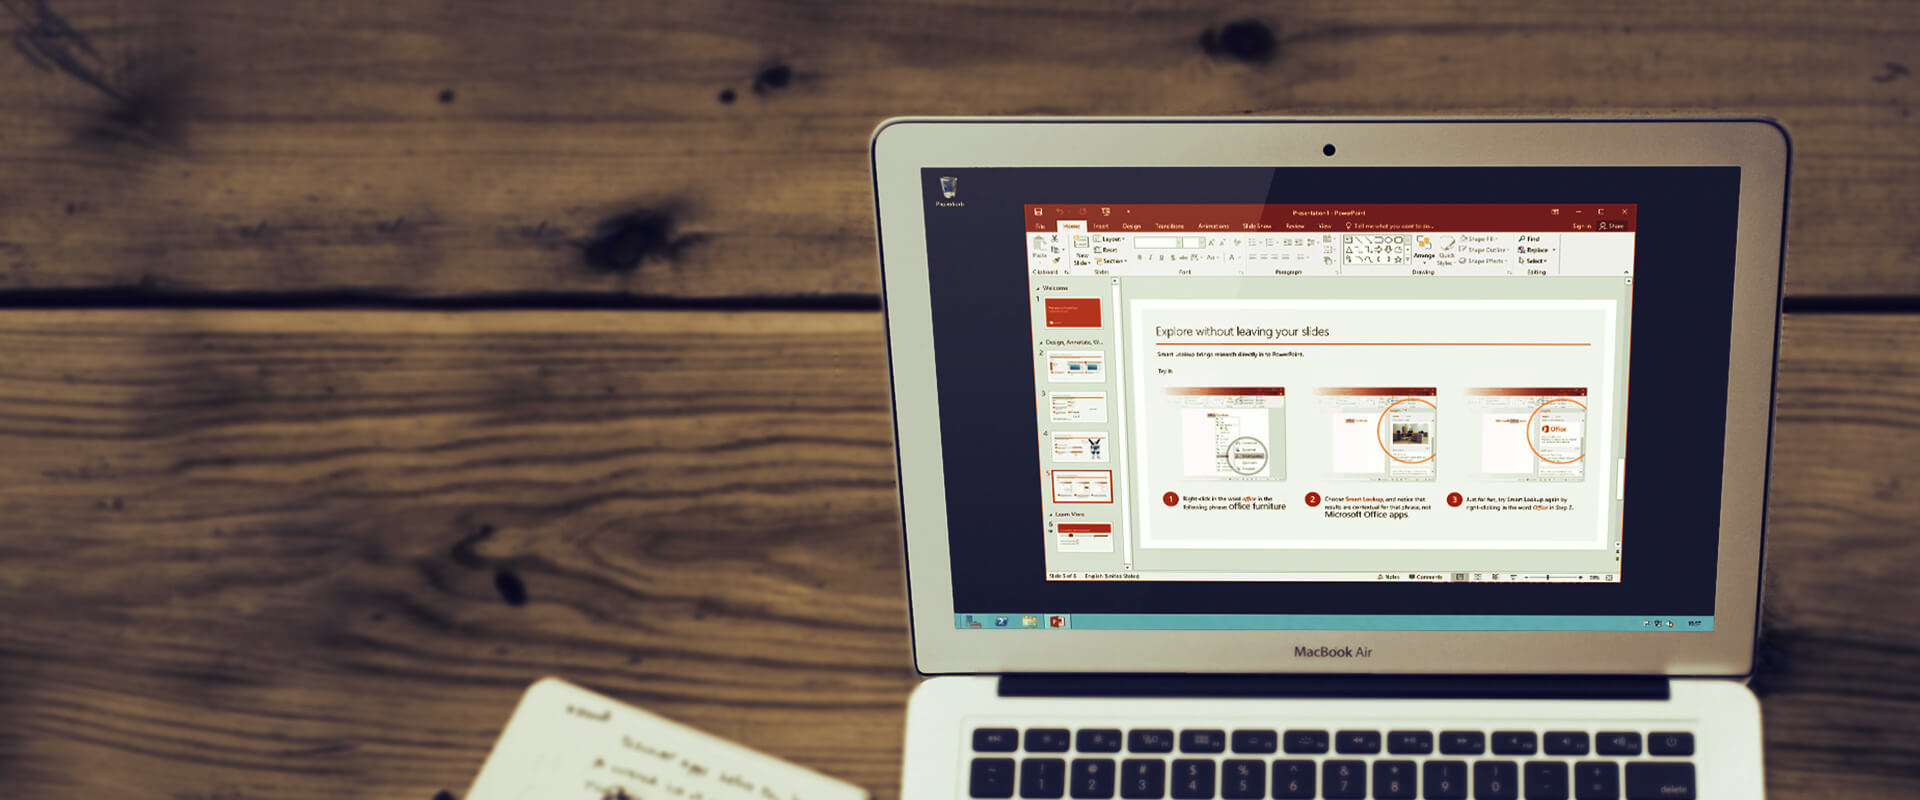 10 Professional PowerPoint Templates to Outdo Your Presentation (Part 1)